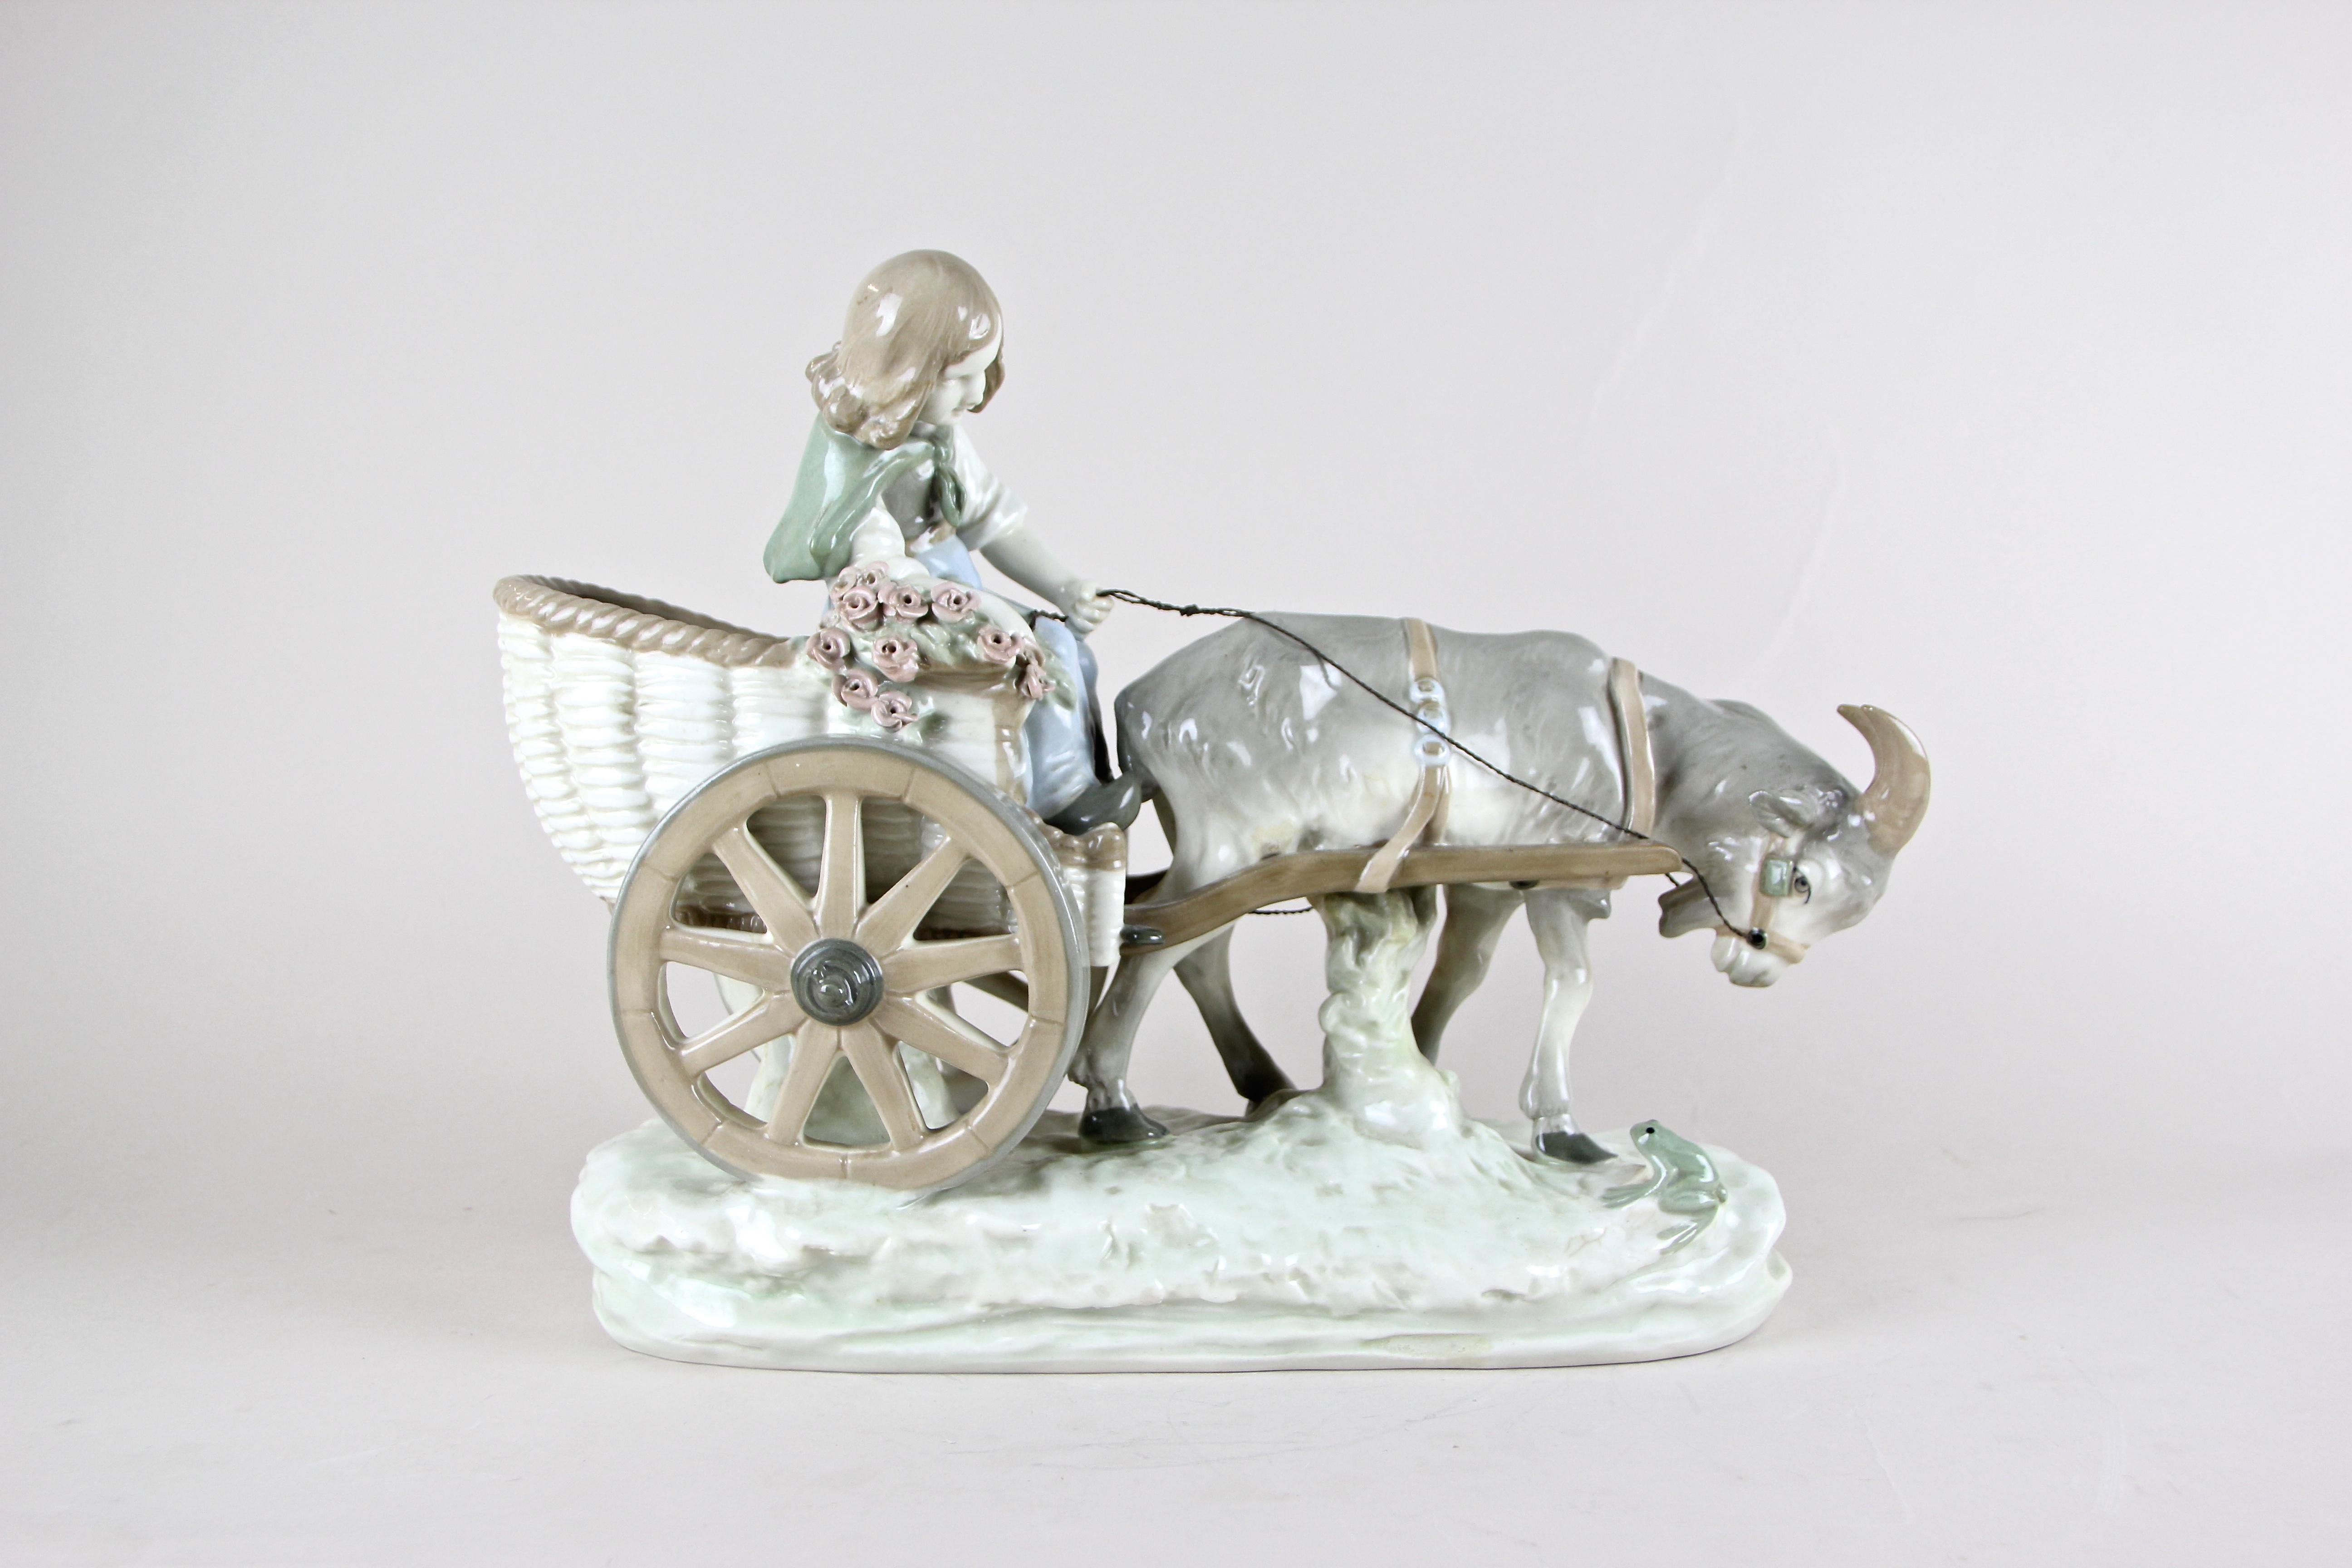 Charming Art Nouveau sculpture by Amphora Czechoslovakia from circa 1915 showing a young girl riding her little buckboard pulled by a Billy goat. A lot of beautiful details can be found within this fantastic figurative sculpture from Amphora: like